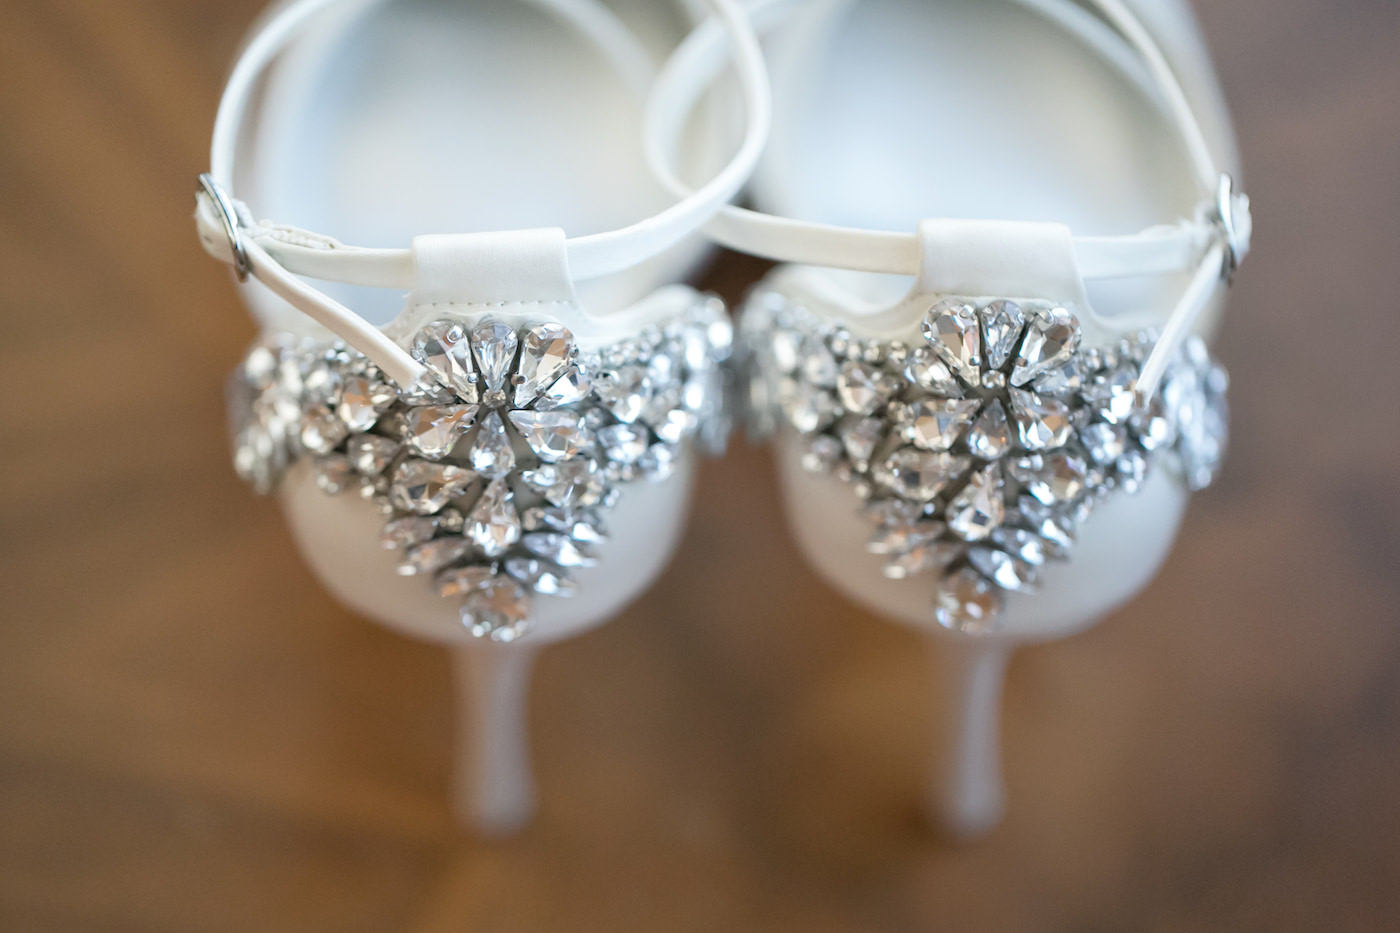 White Bridal with Chunky Rhinestone Heel Wedding Shoes | Wedding Photographer Carrie Wildes Photography